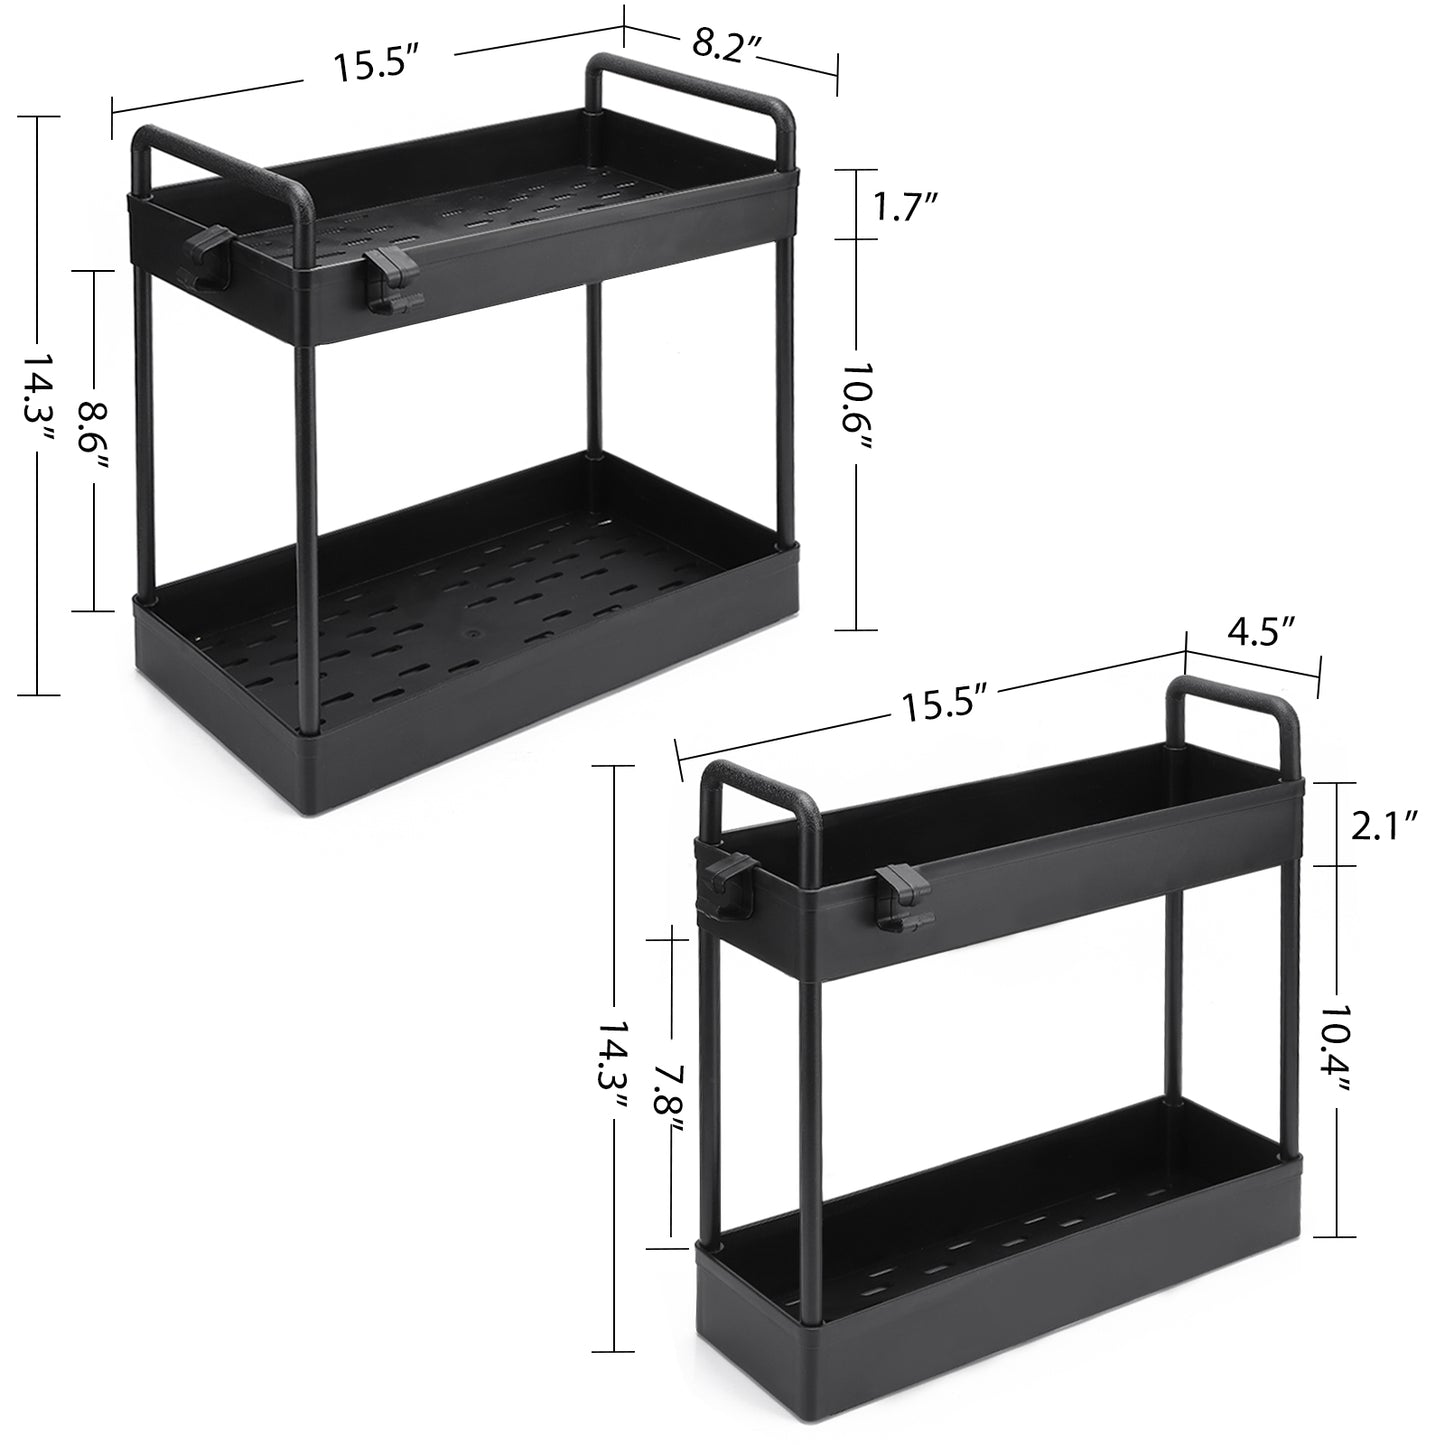 2pcs Under Sink Organizers and Storage,Black Under Sink Organizer,2 Tier Kitchen Cabinet Sink Organizer with Hooks for Home Kitchen Bathroom